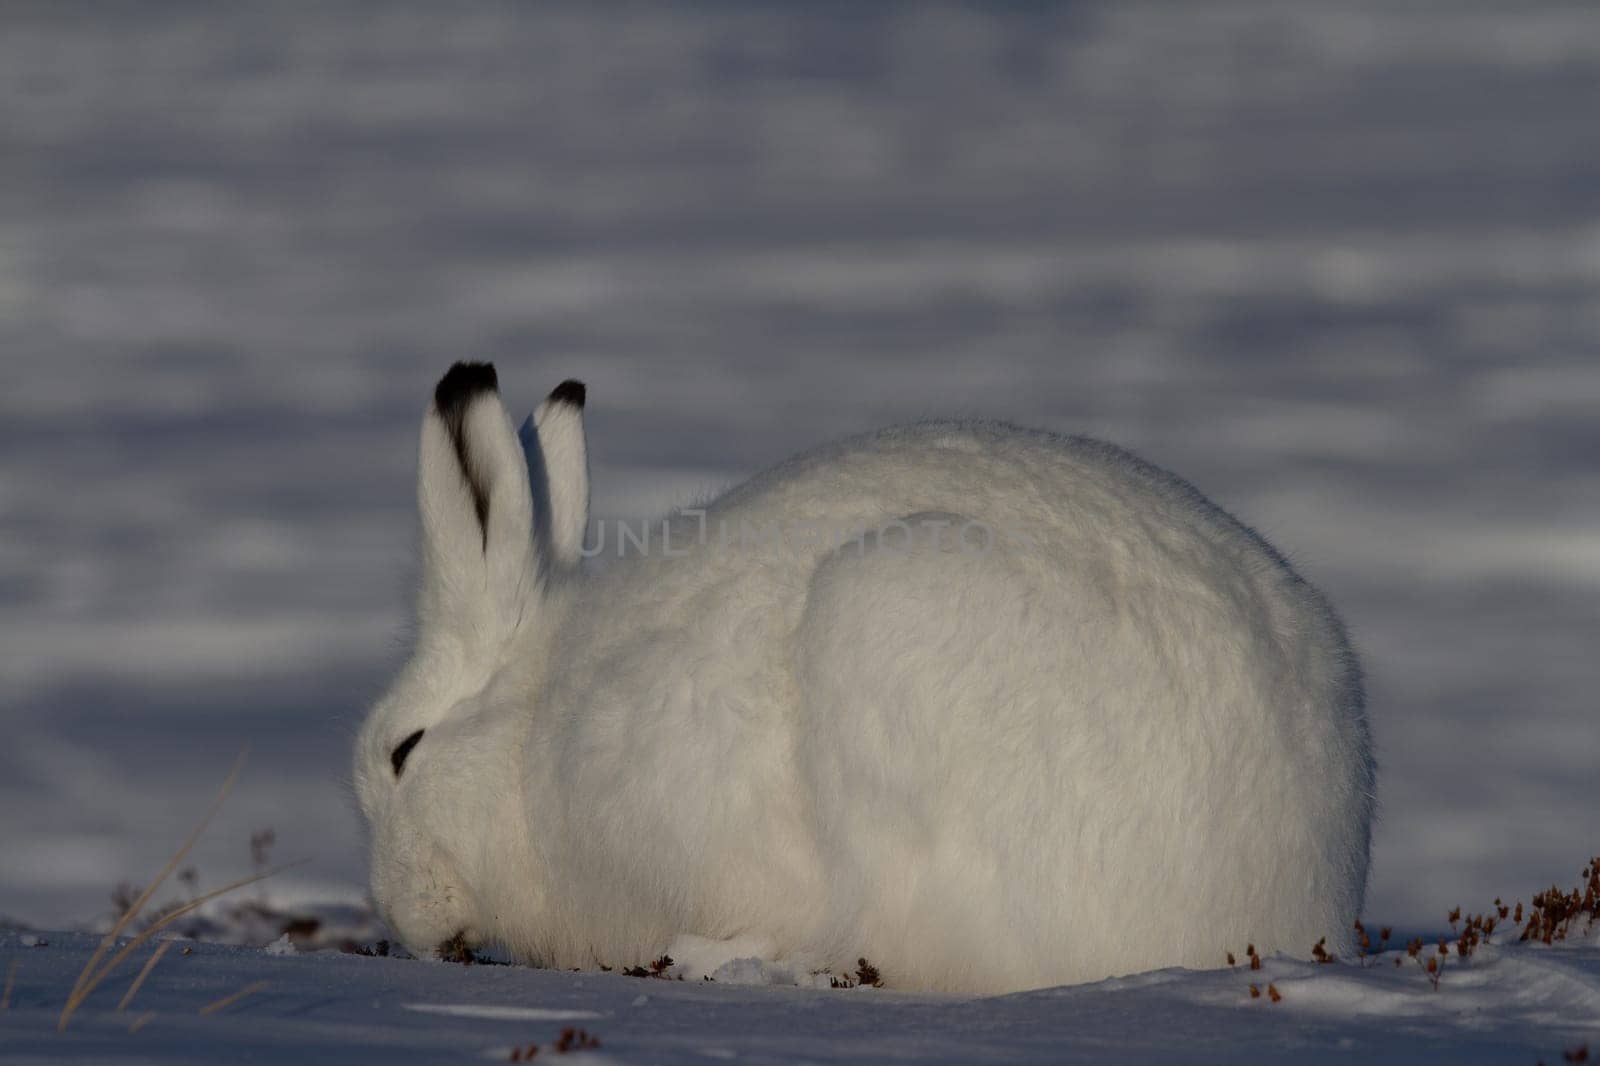 Arctic hare in winter coat chewing on a willow branch with snow in the background by Granchinho